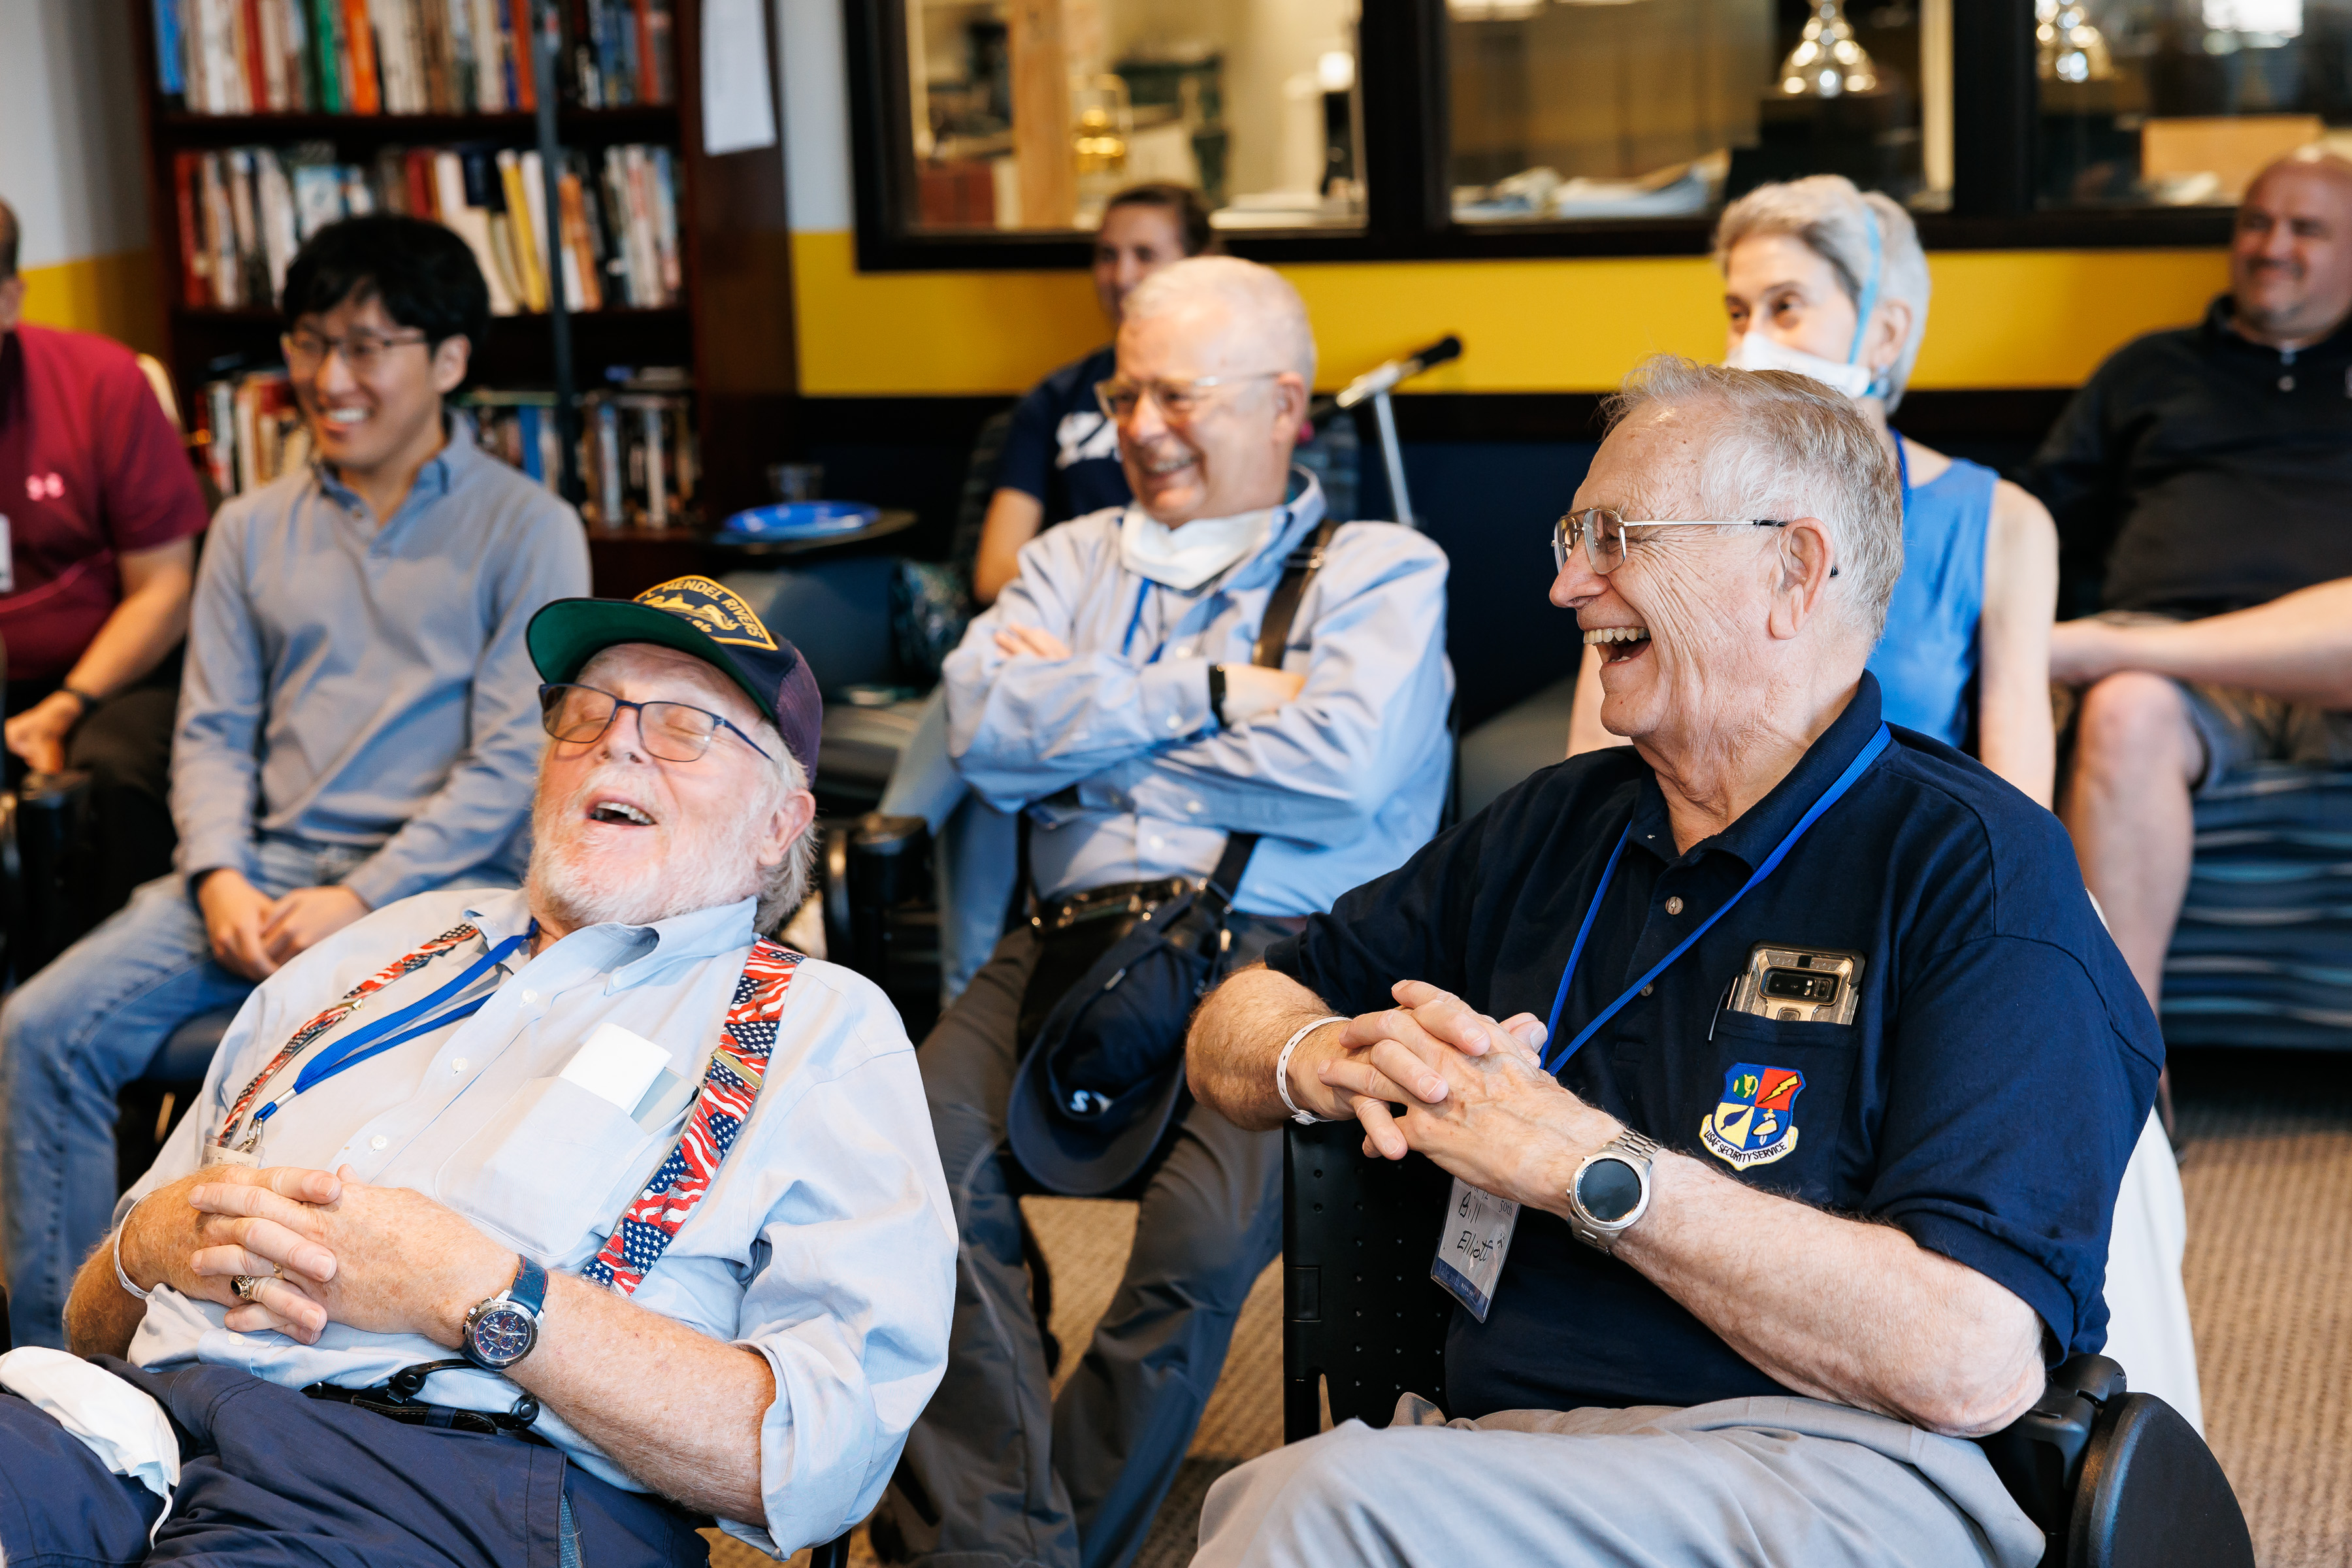 Photo: Rusty Pickett ’72 and Bill Elliott ’72 (front row, left to right) and their fellow veterans share a laugh during one of the event's presentations. Credit: Tony Fiorini